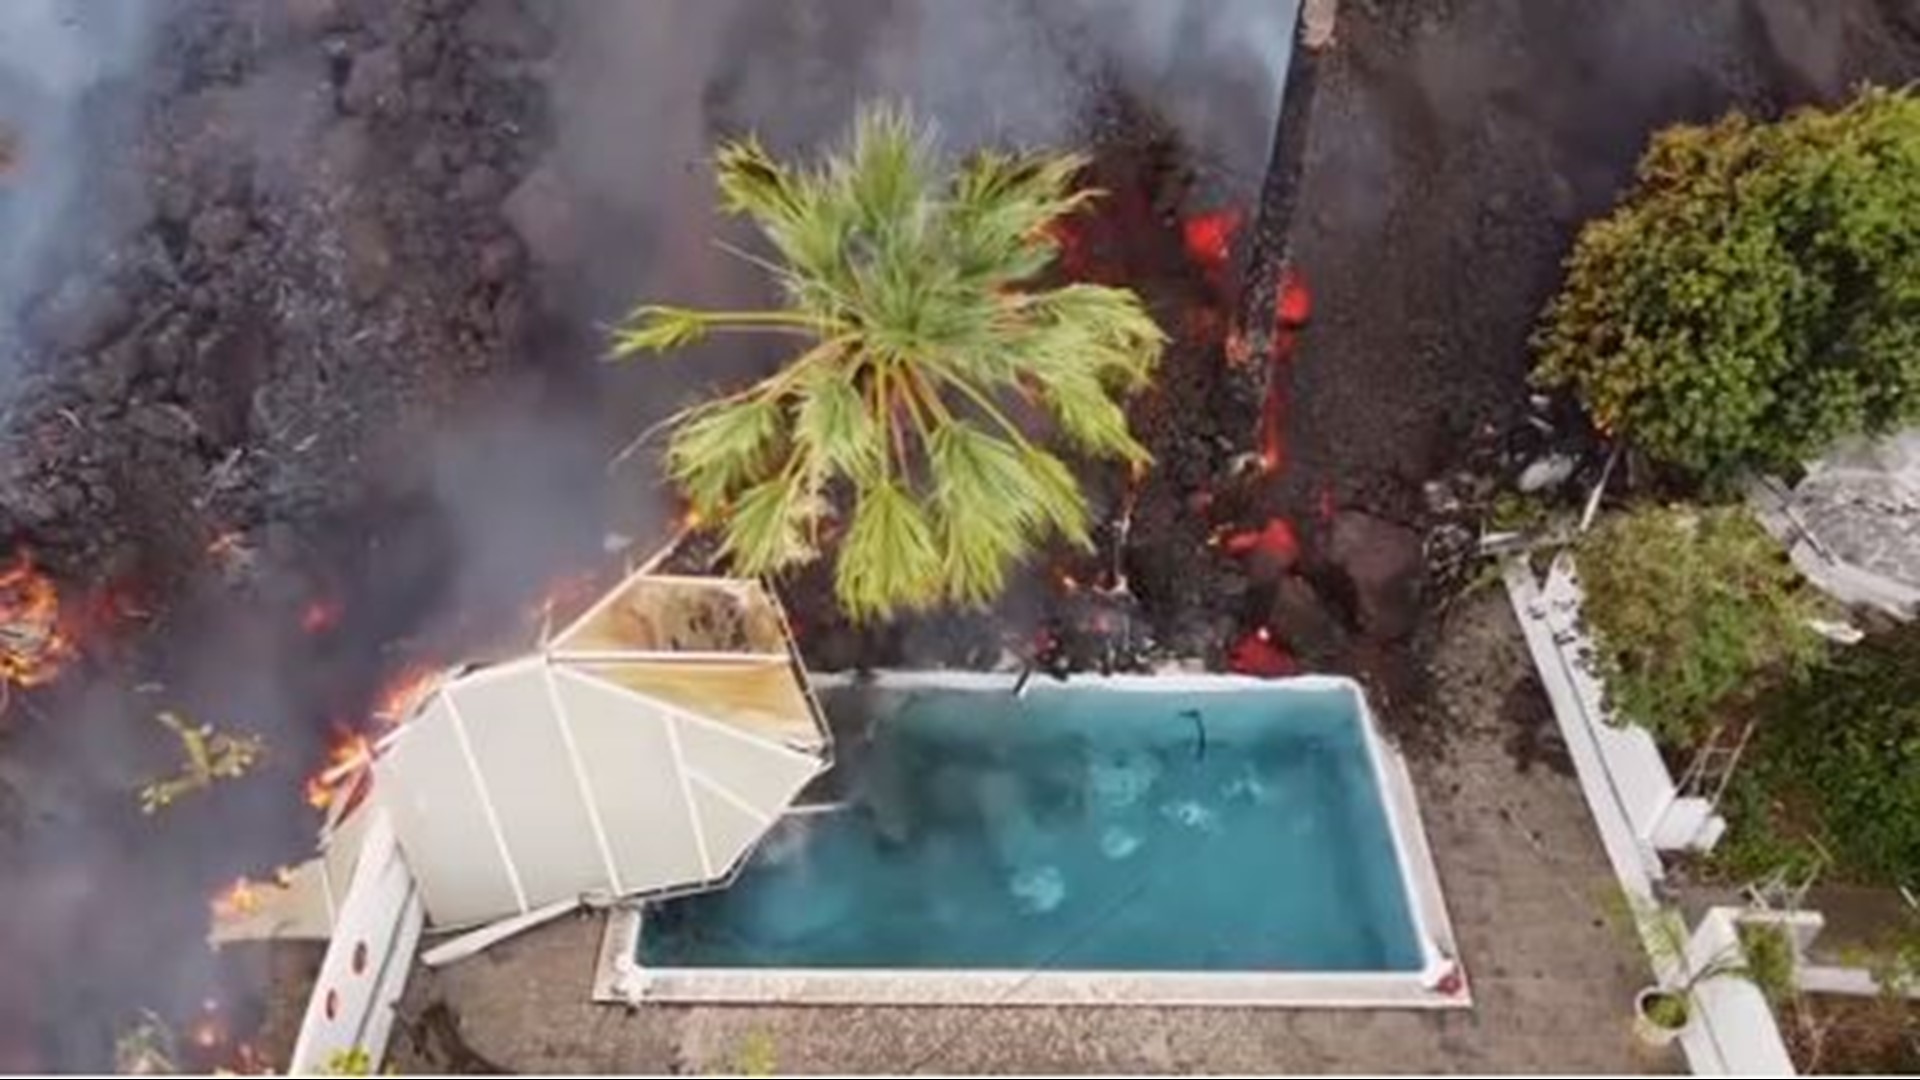 Aerial pictures have captured the destruction that the small island of La Palma in the Canary Islands is facing since a volcano erupted.